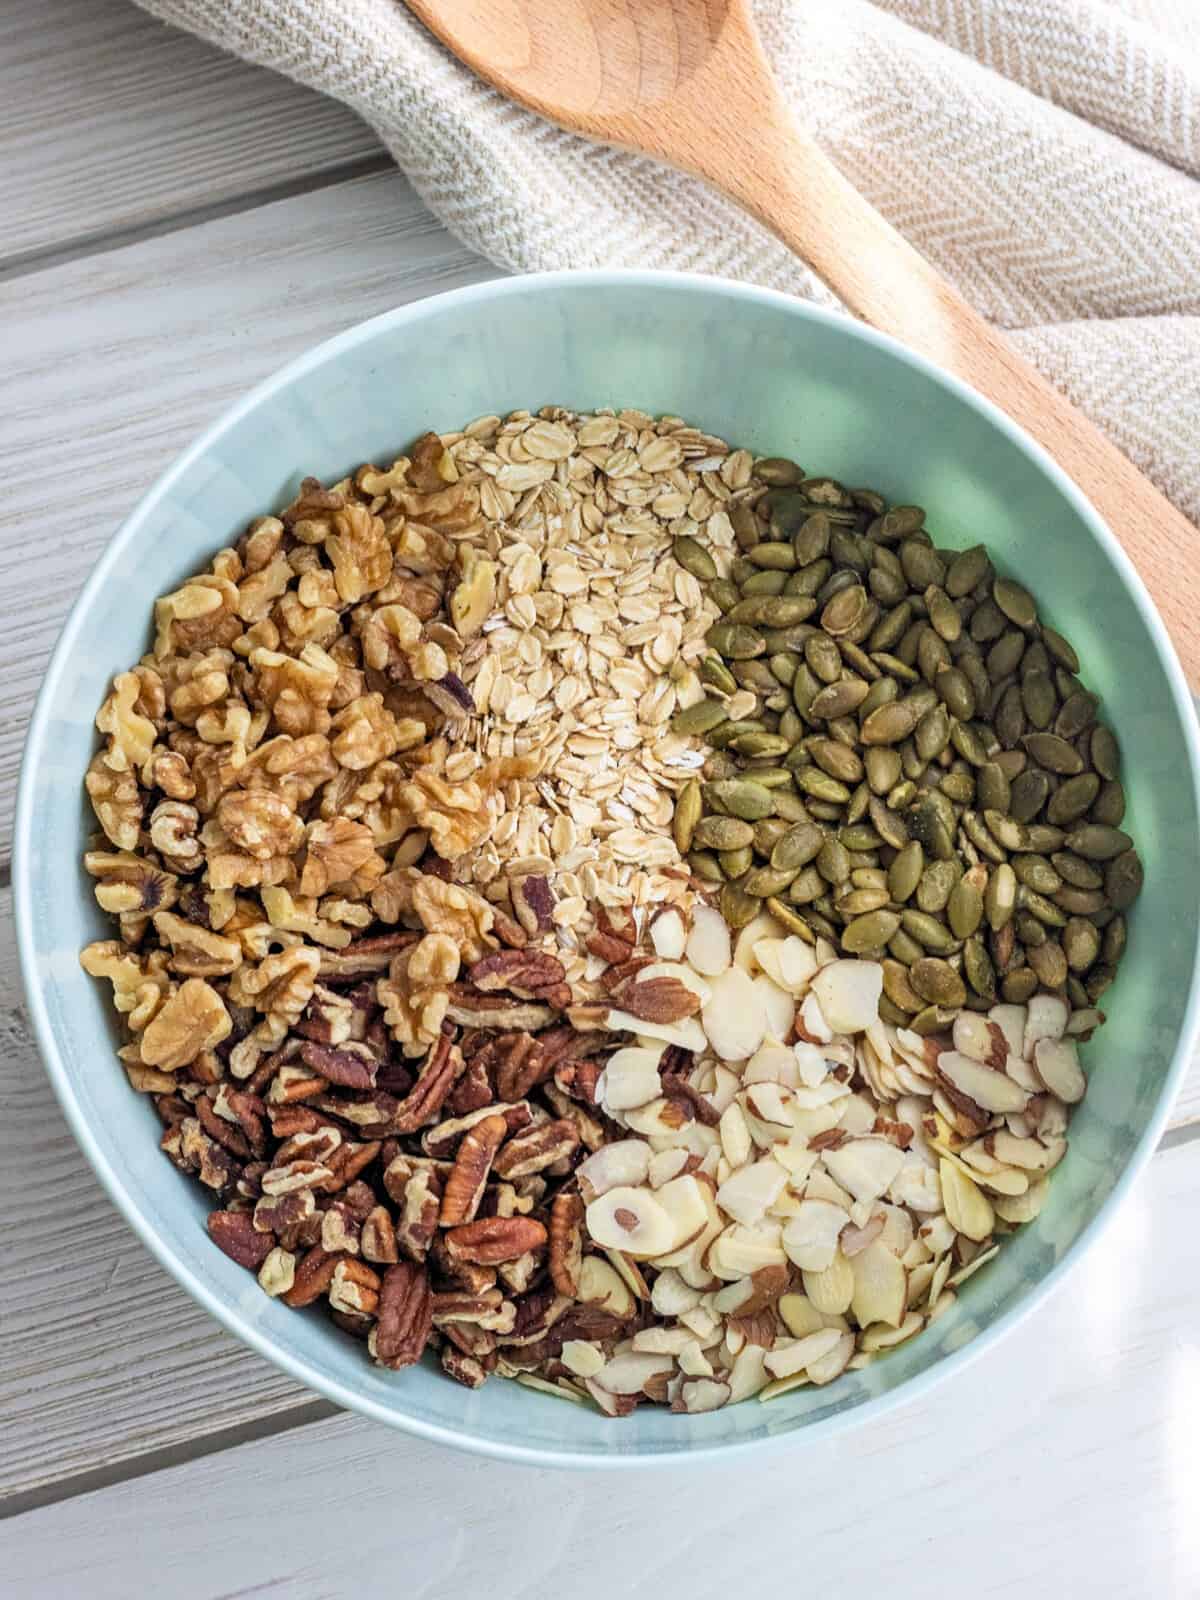 Oats, pumpkin seeds, walnuts, pecans, and almonds in a bowl.